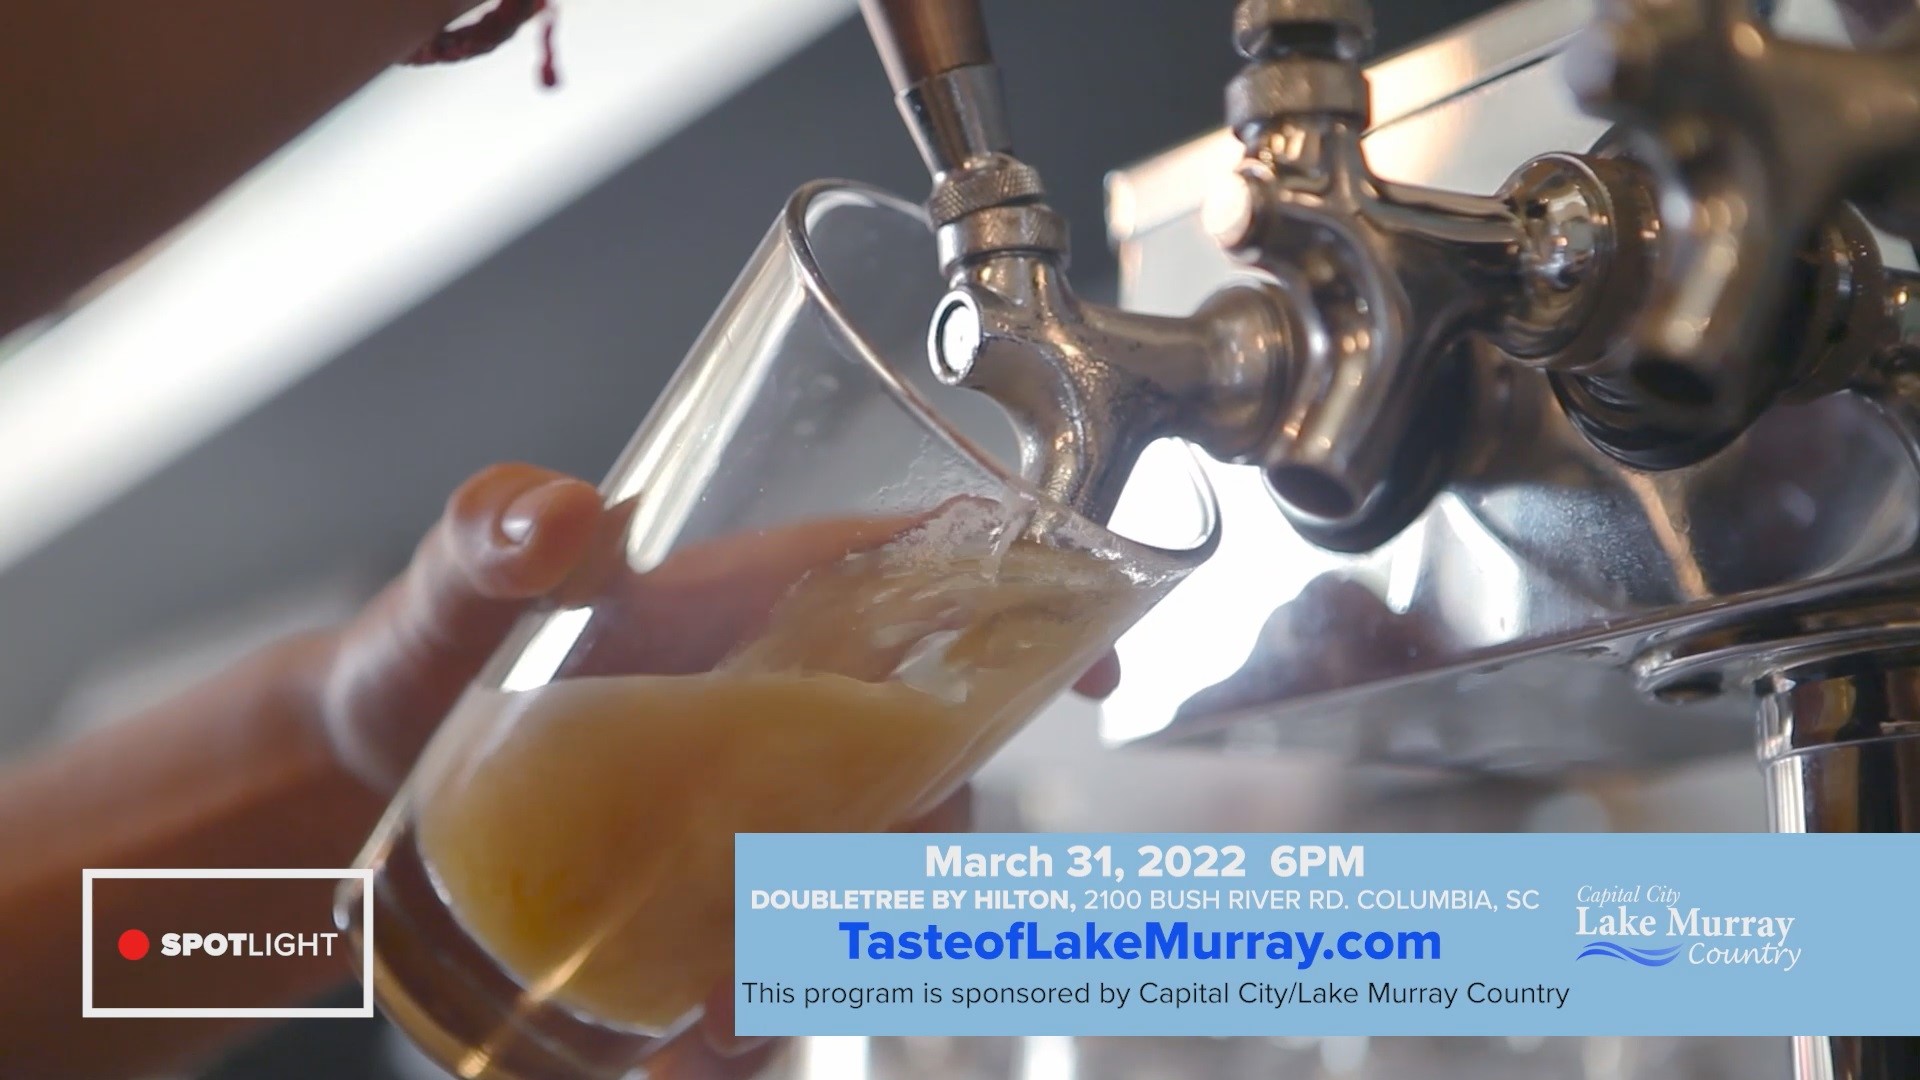 Get your tickets today for the Taste of Lake Murray on March 31st!